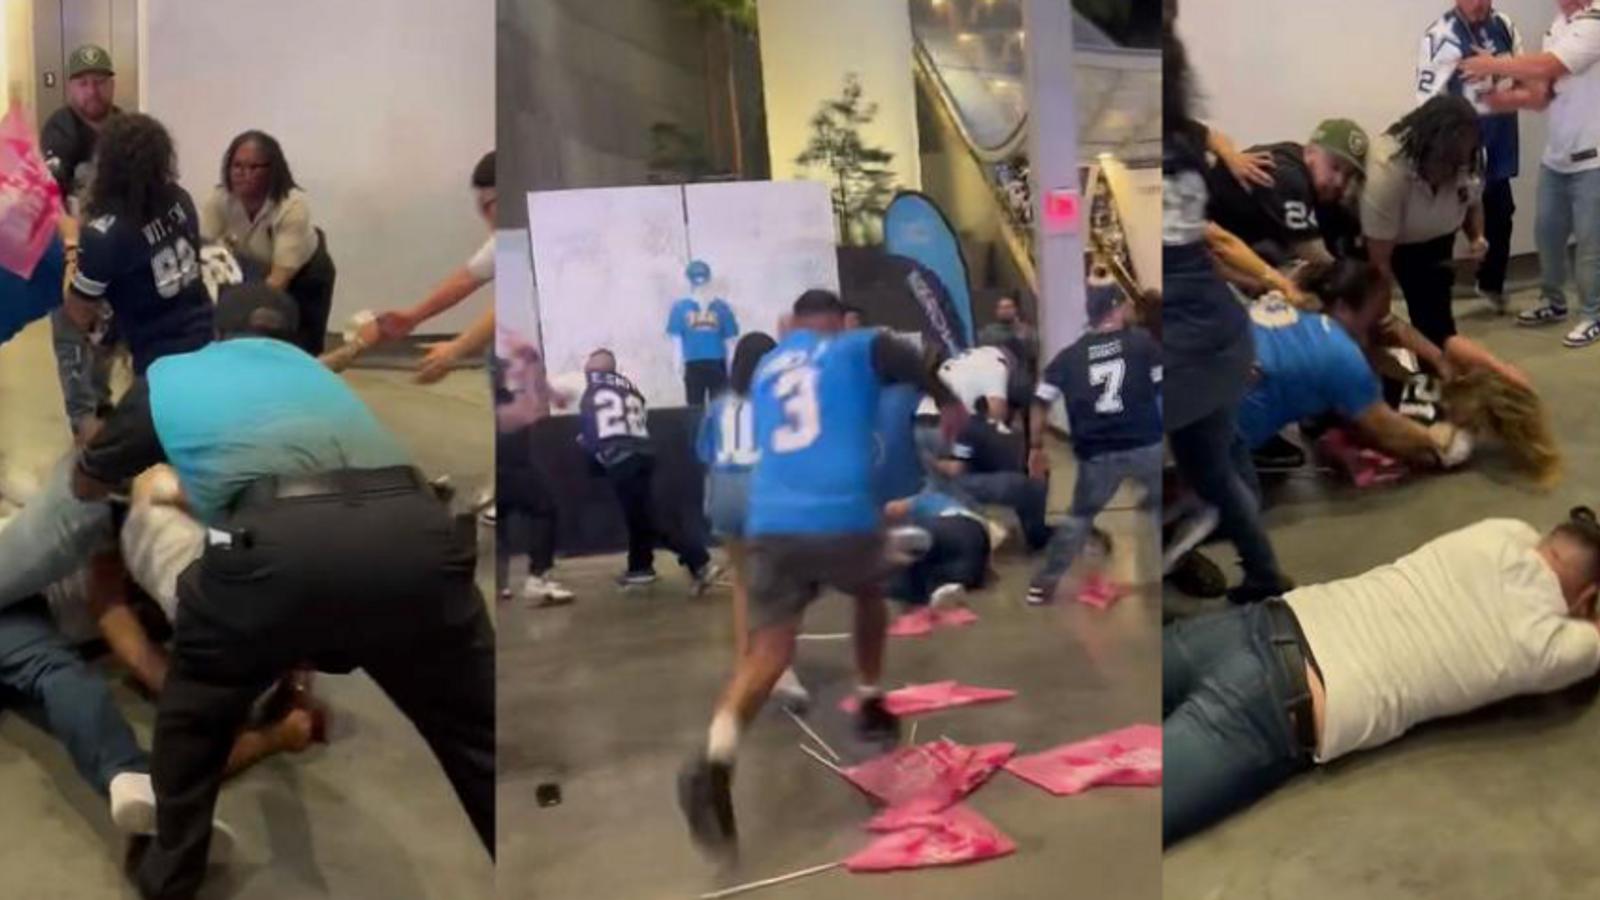 10+ person brawl between Cowboys/Chargers fans goes viral 